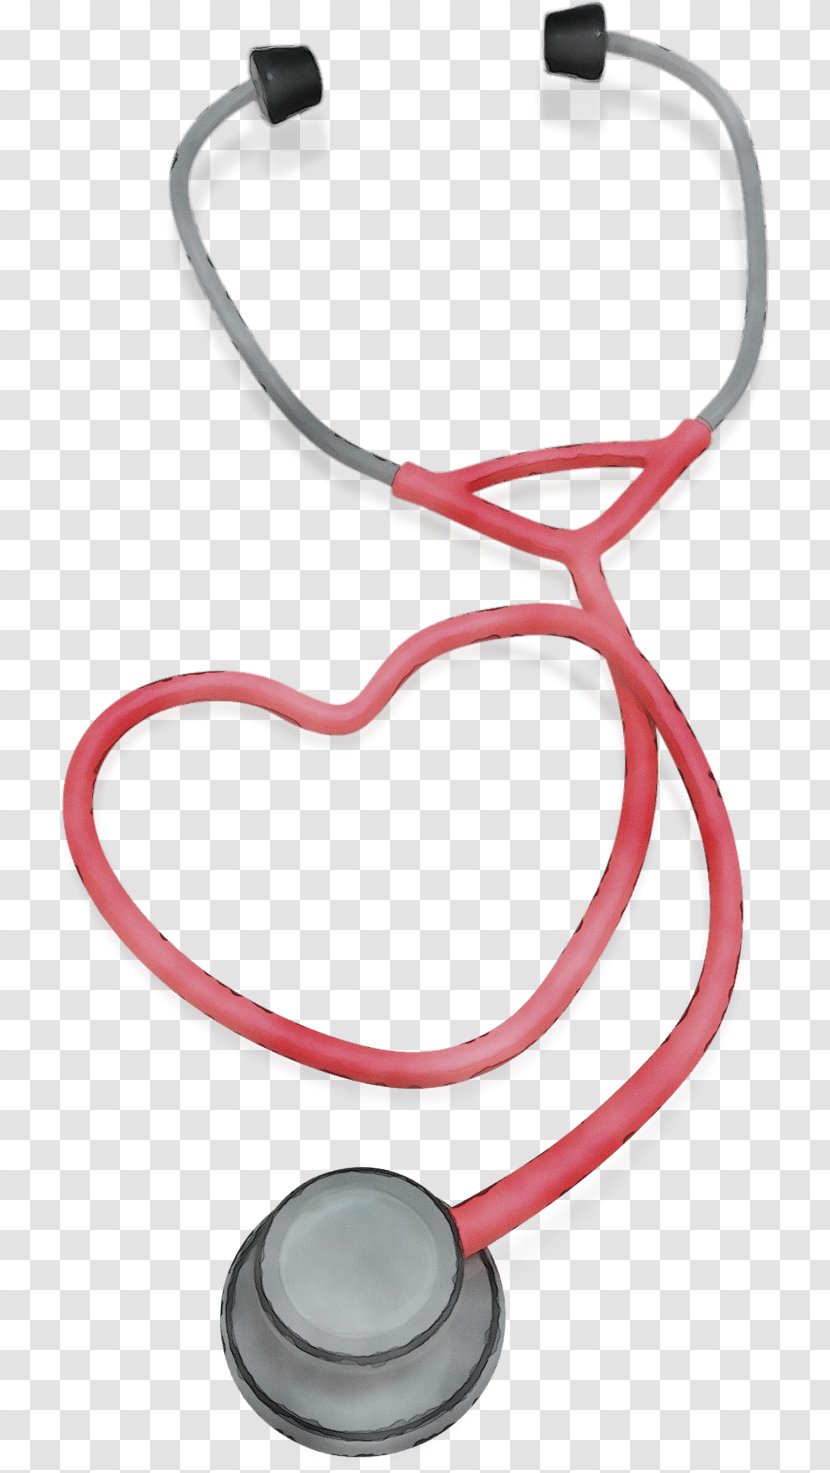 Stethoscope Cartoon - Watercolor - Jewellery Service Transparent PNG